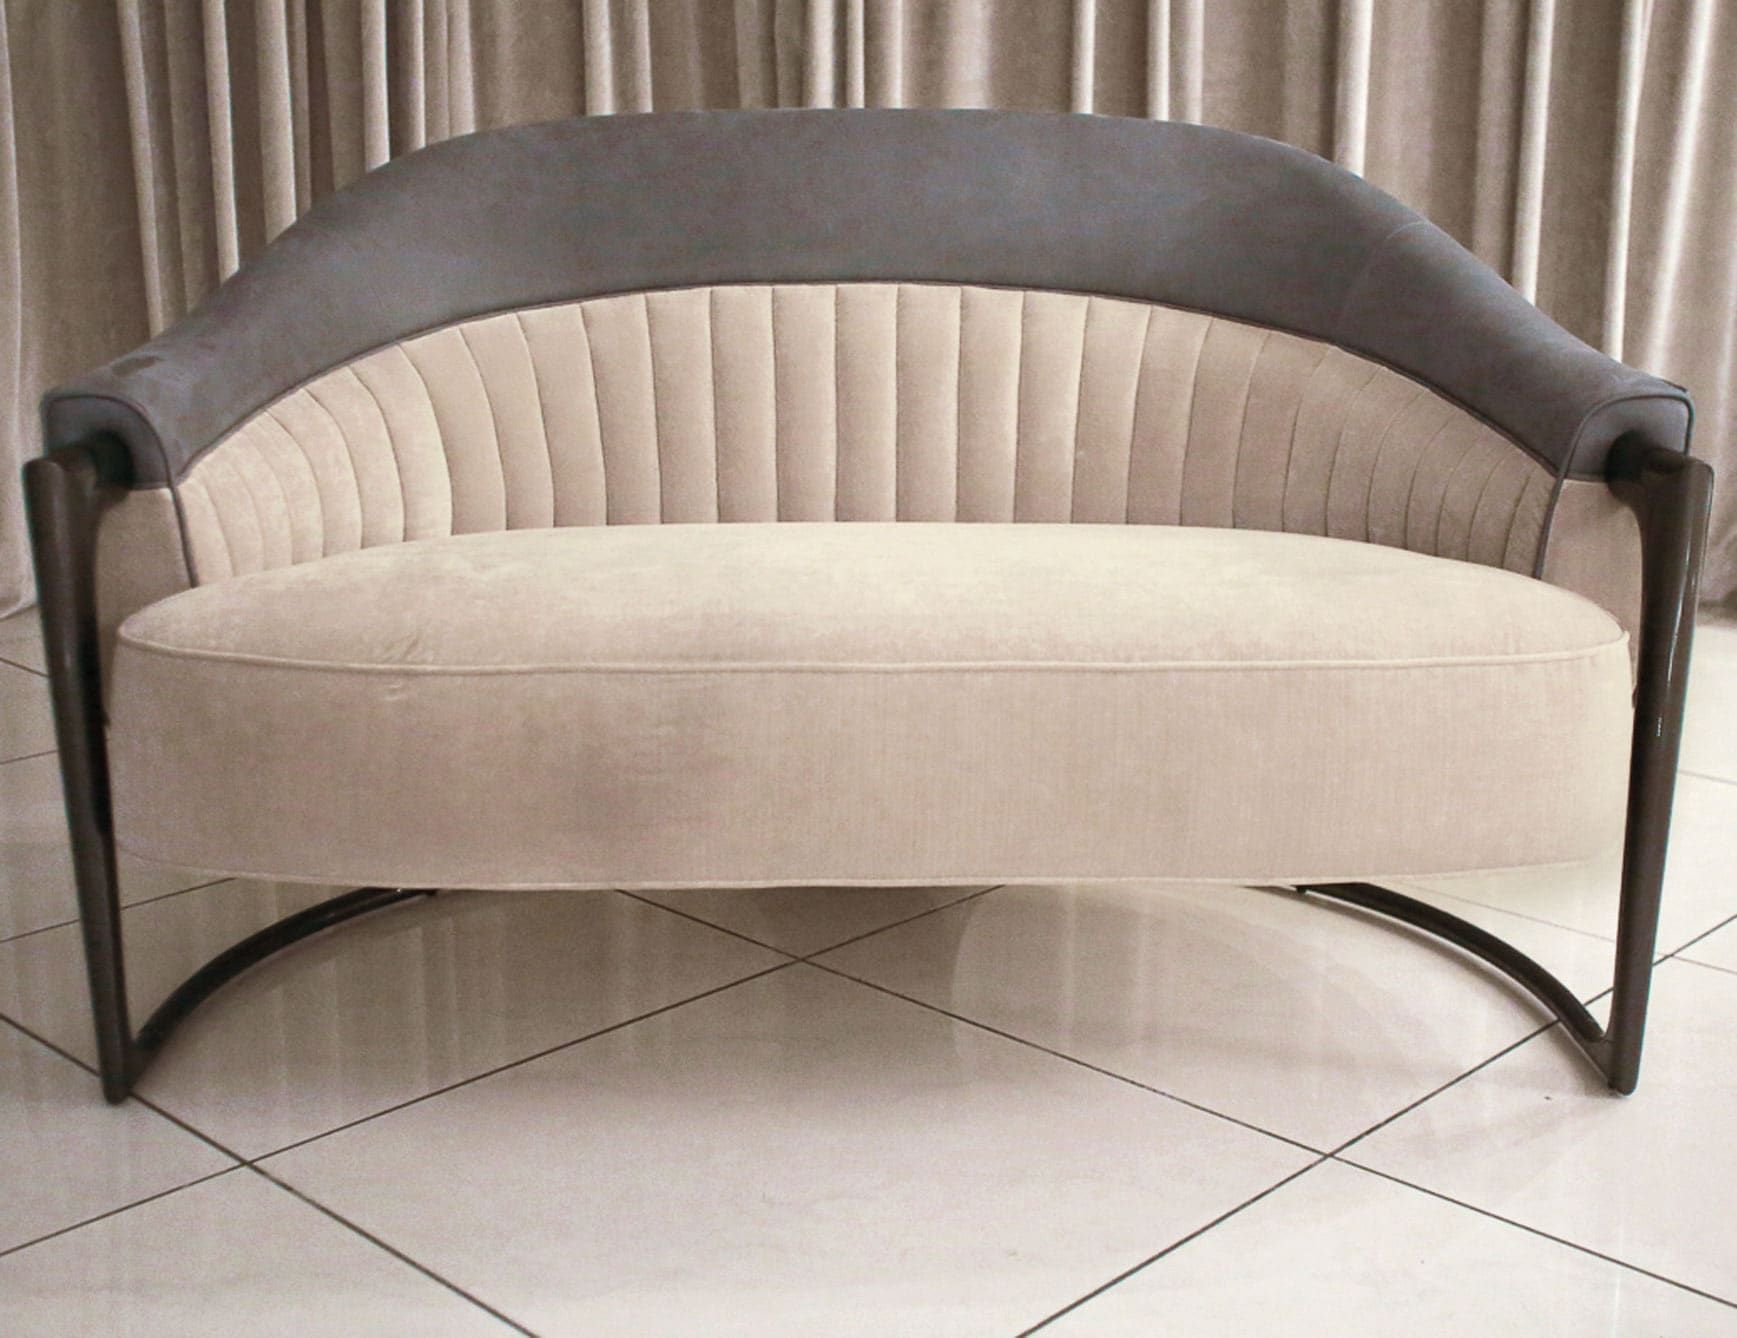 Grace modern luxury sofa chair with beige leather